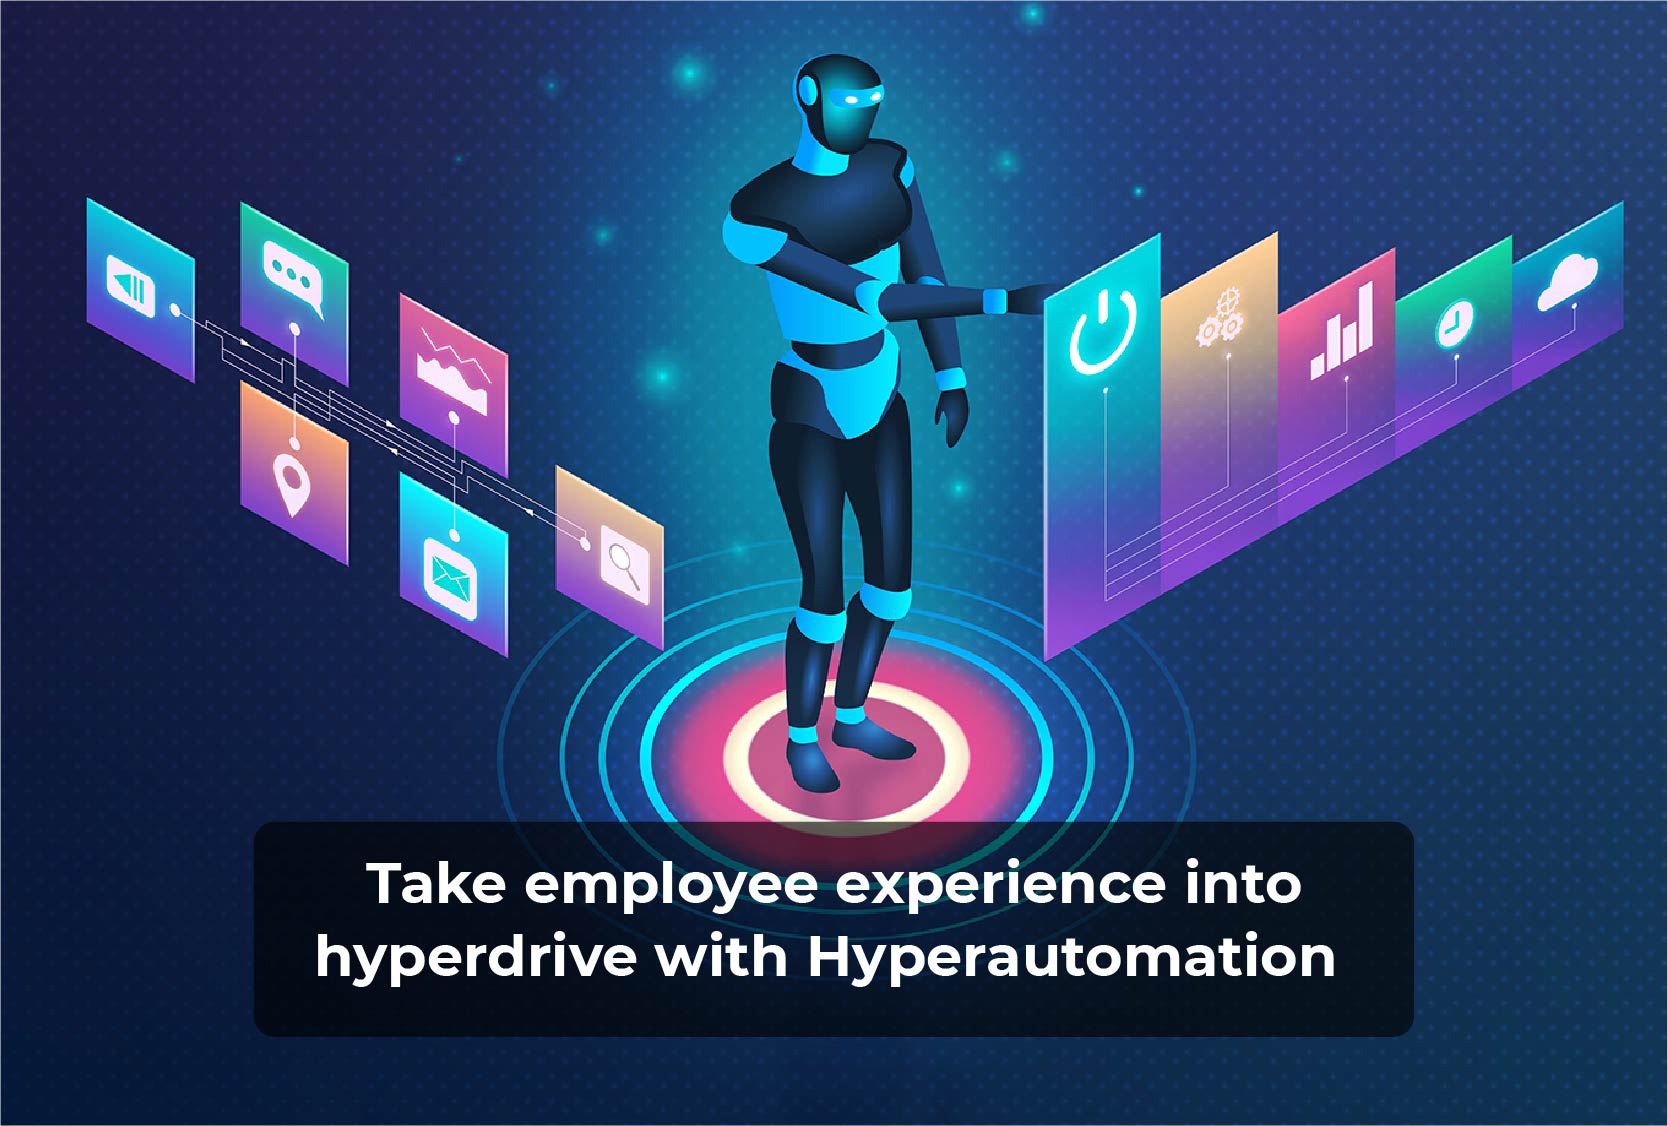 Take employee experience into hyperdrive with Hyperautomation